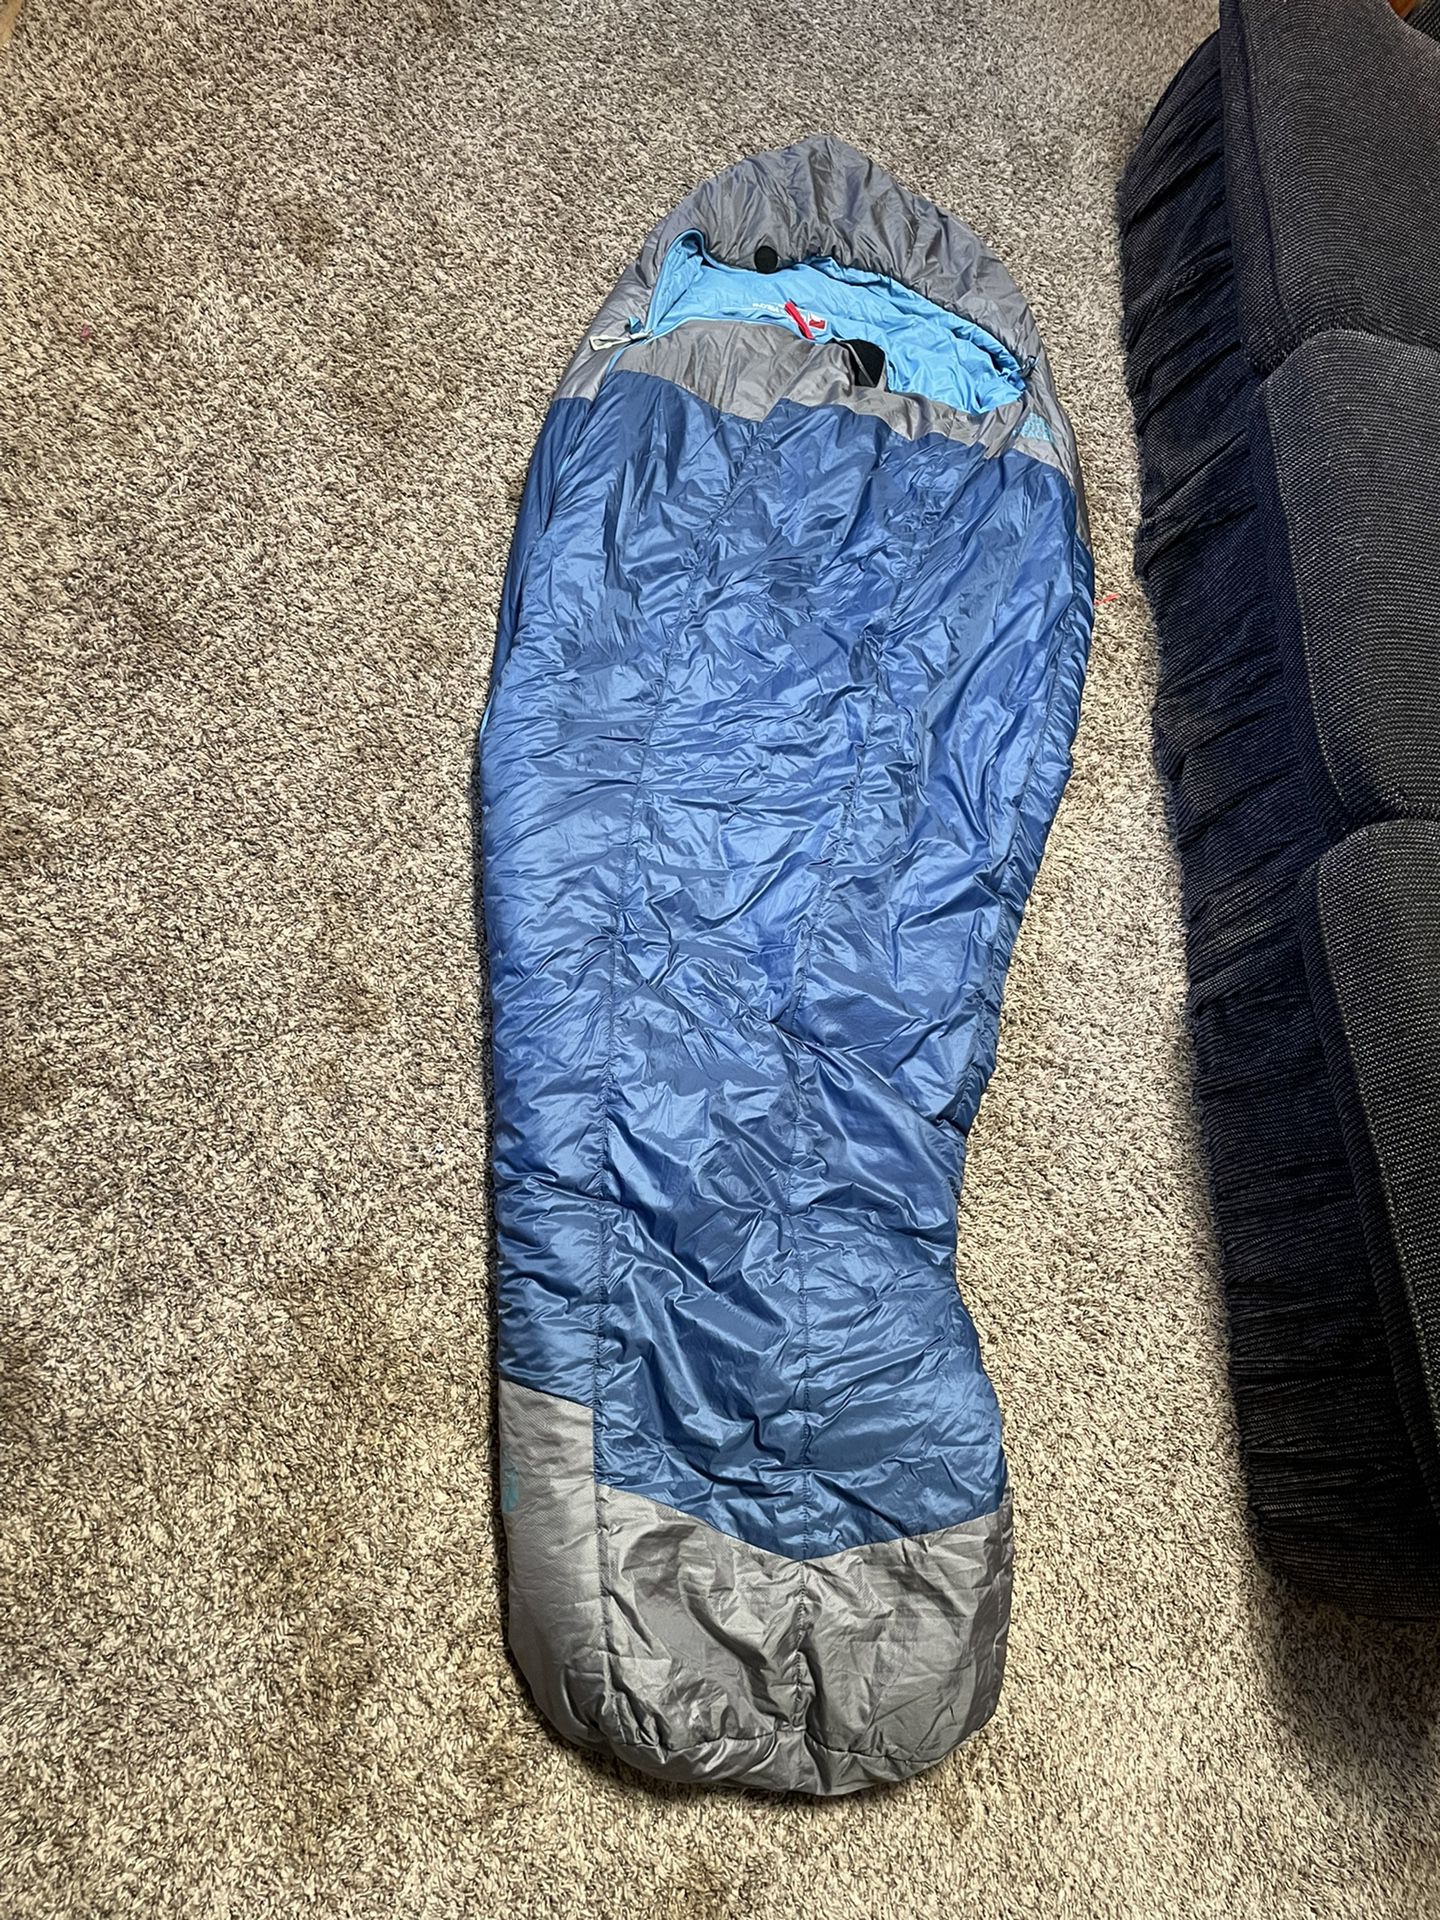 North Face Cat's Meow Sleeping Bag